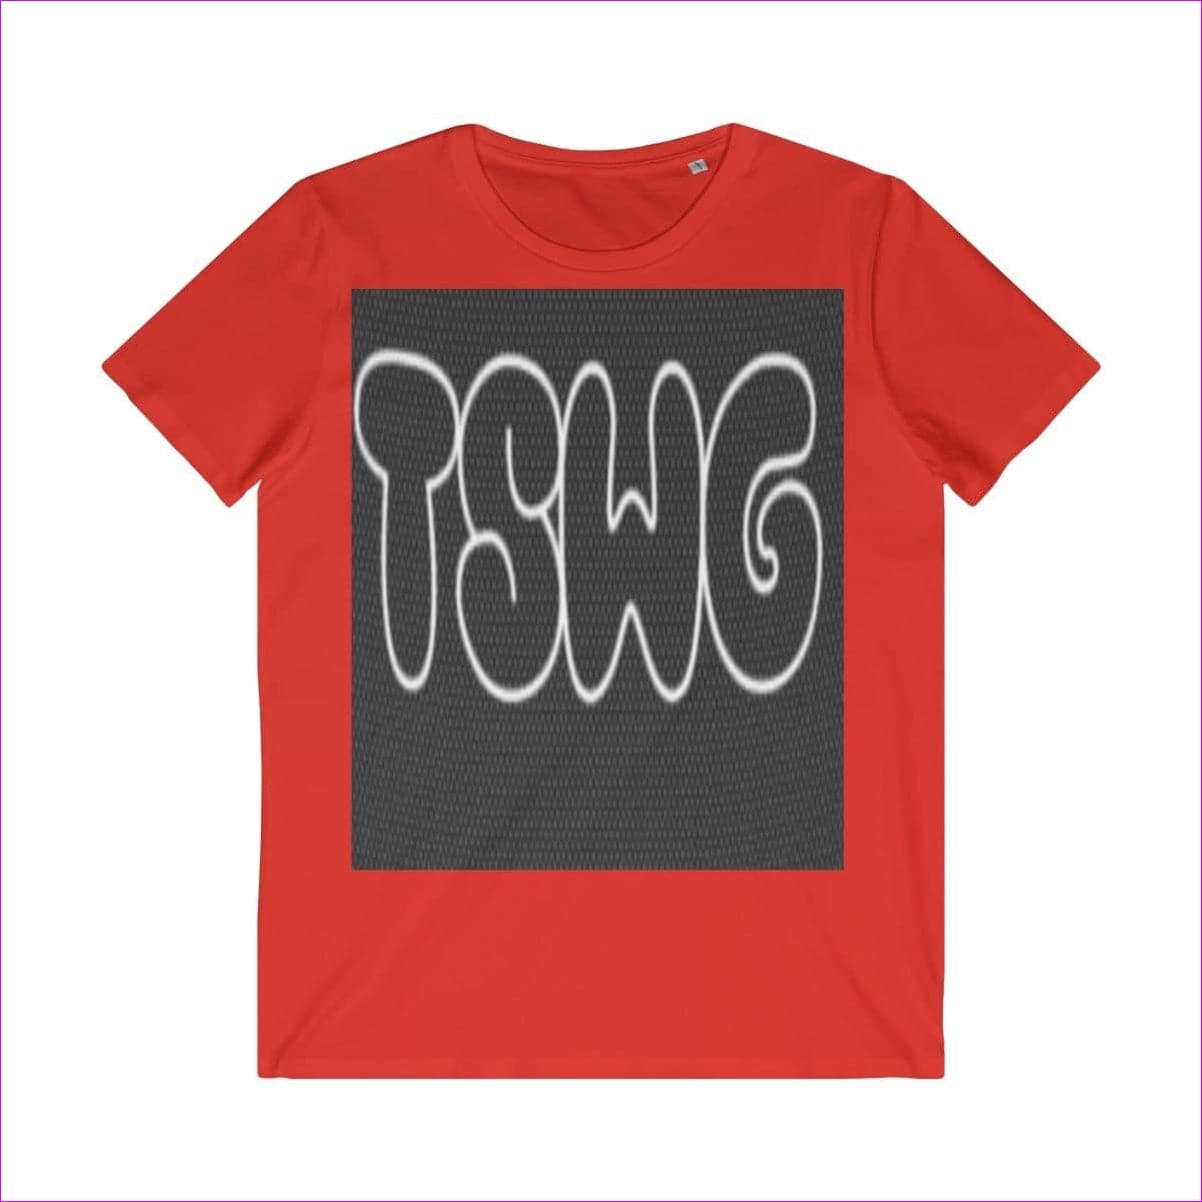 Red TSWG ( Tough Smooth Well Groomed) Men's Organic Tee - T-Shirt at TFC&H Co.